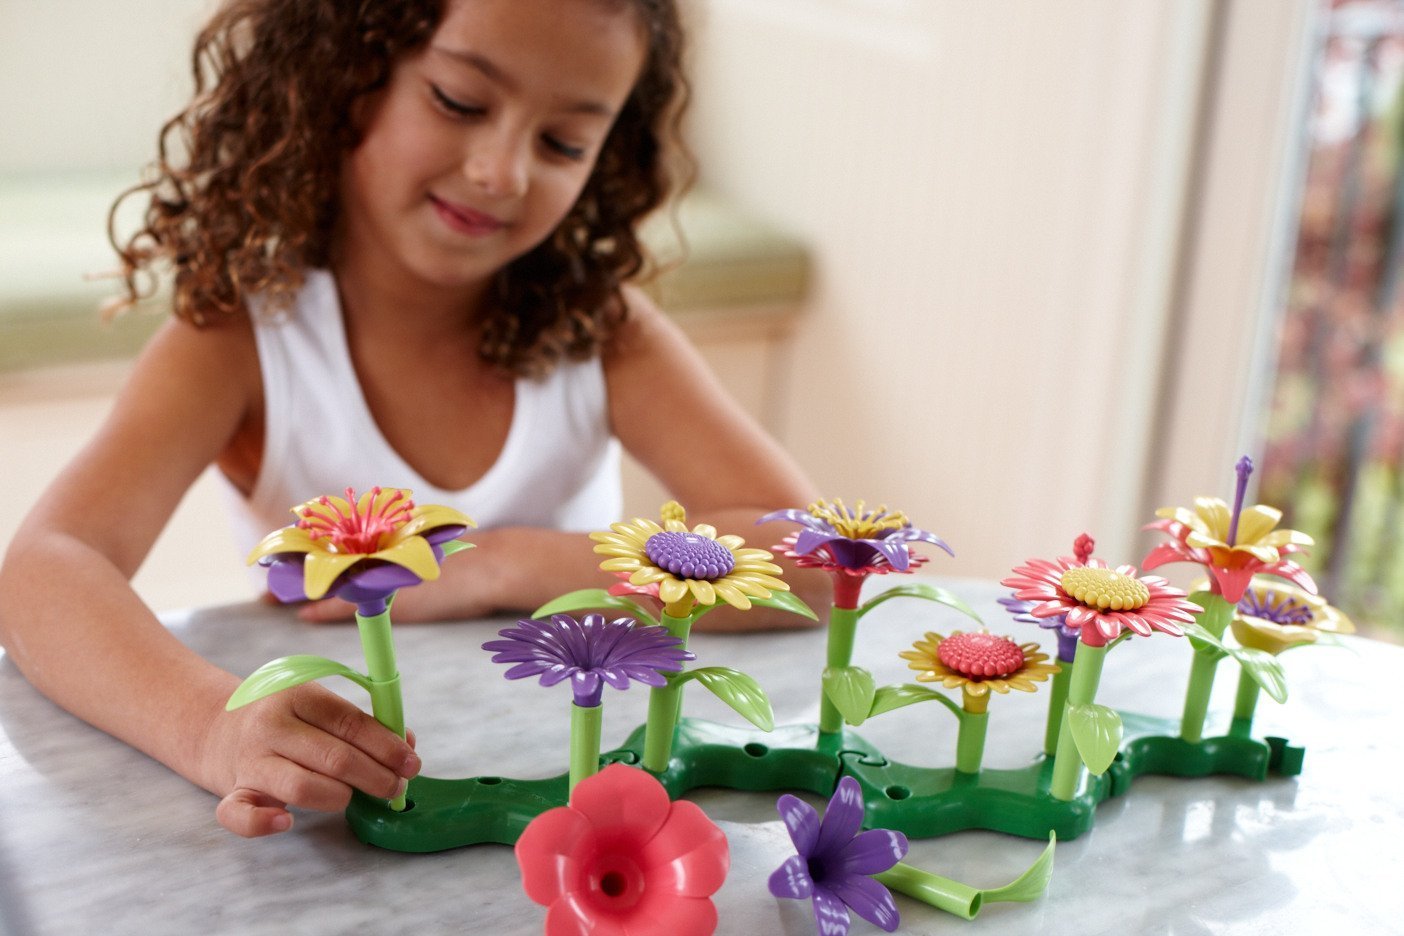 Green Toys Build-a-Bouquet, 4C - 44 Piece Pretend Play, Motor Skills, Building and Stacking Kids Toy Set. No BPA, phthatates, PVC. Dishwasher Safe, Recycled Plastic, Made in USA.